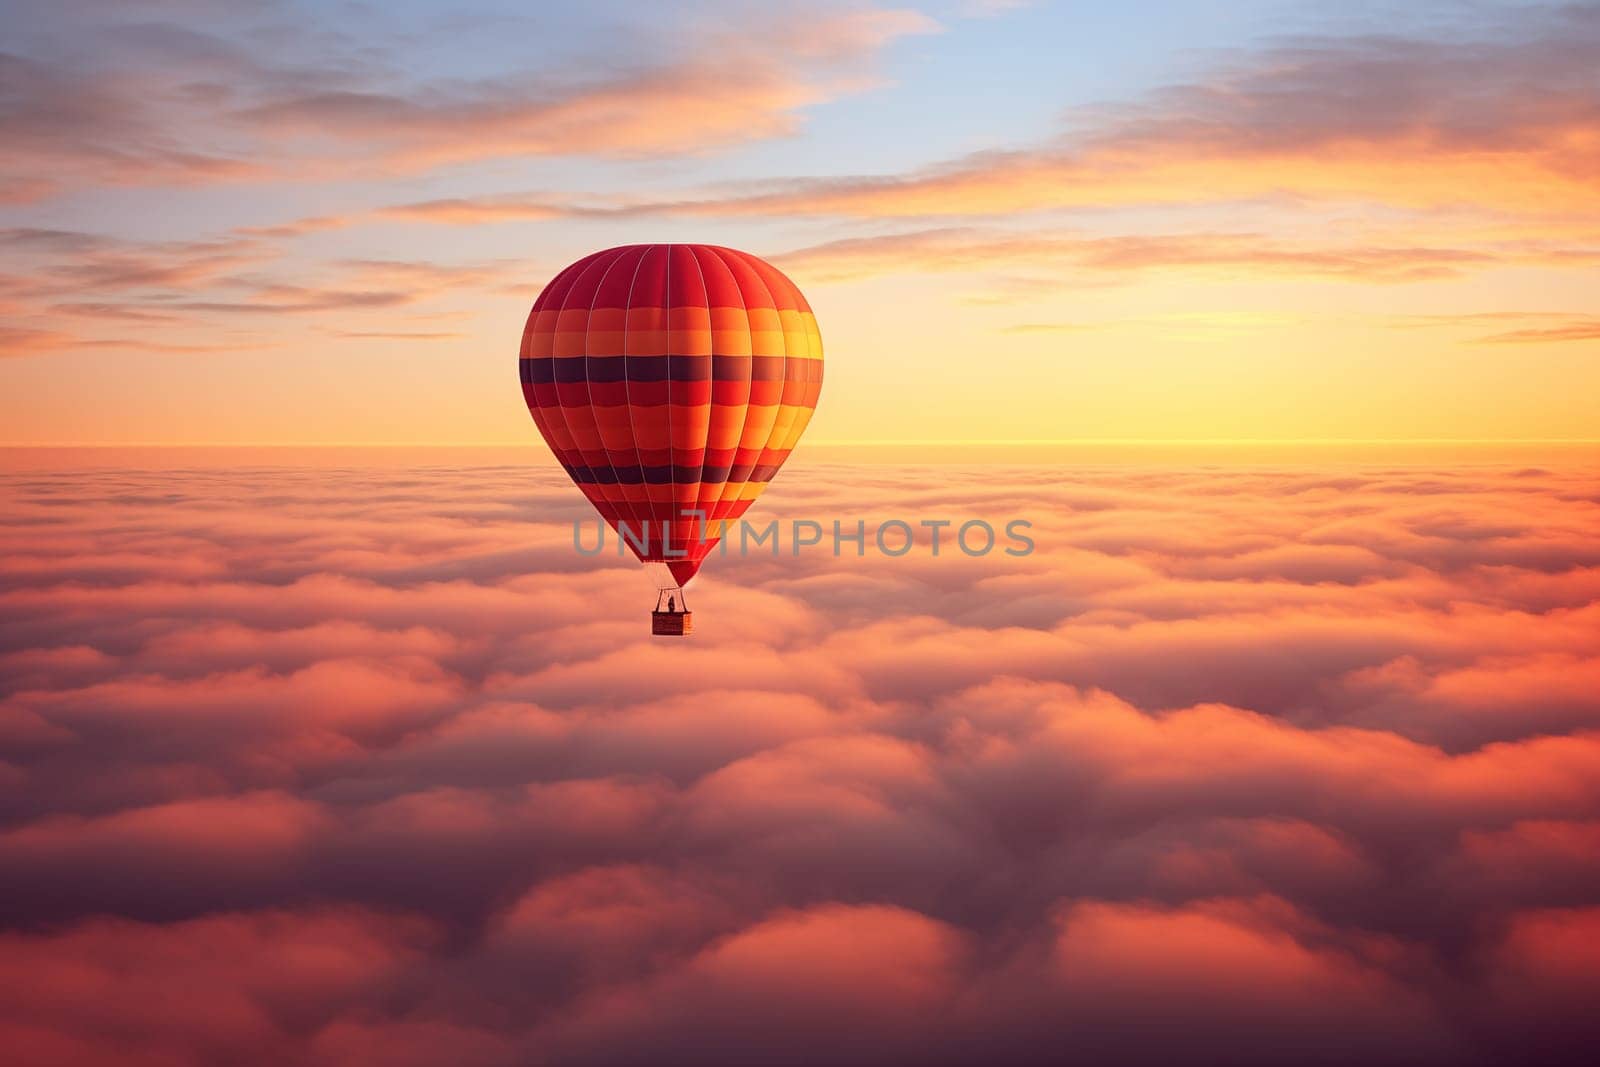 Colorful hot air balloon floats over a sea of clouds at sunset at sunset with orange and blue skies in the background. Travel journey adventure beauty of nature concept